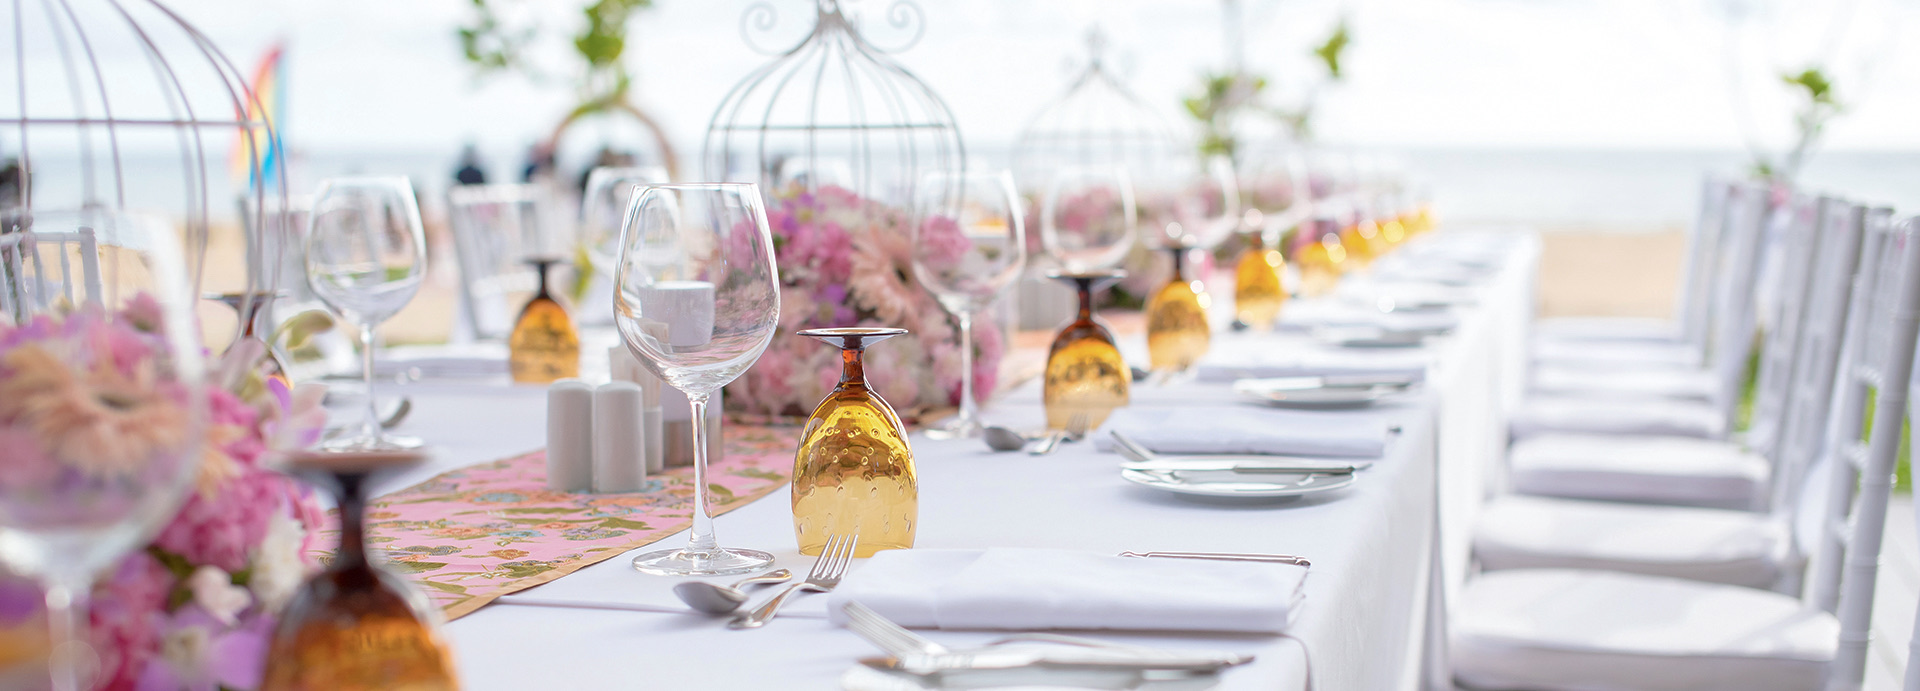 Long white linen covered table setup for dining on the beach during the day.